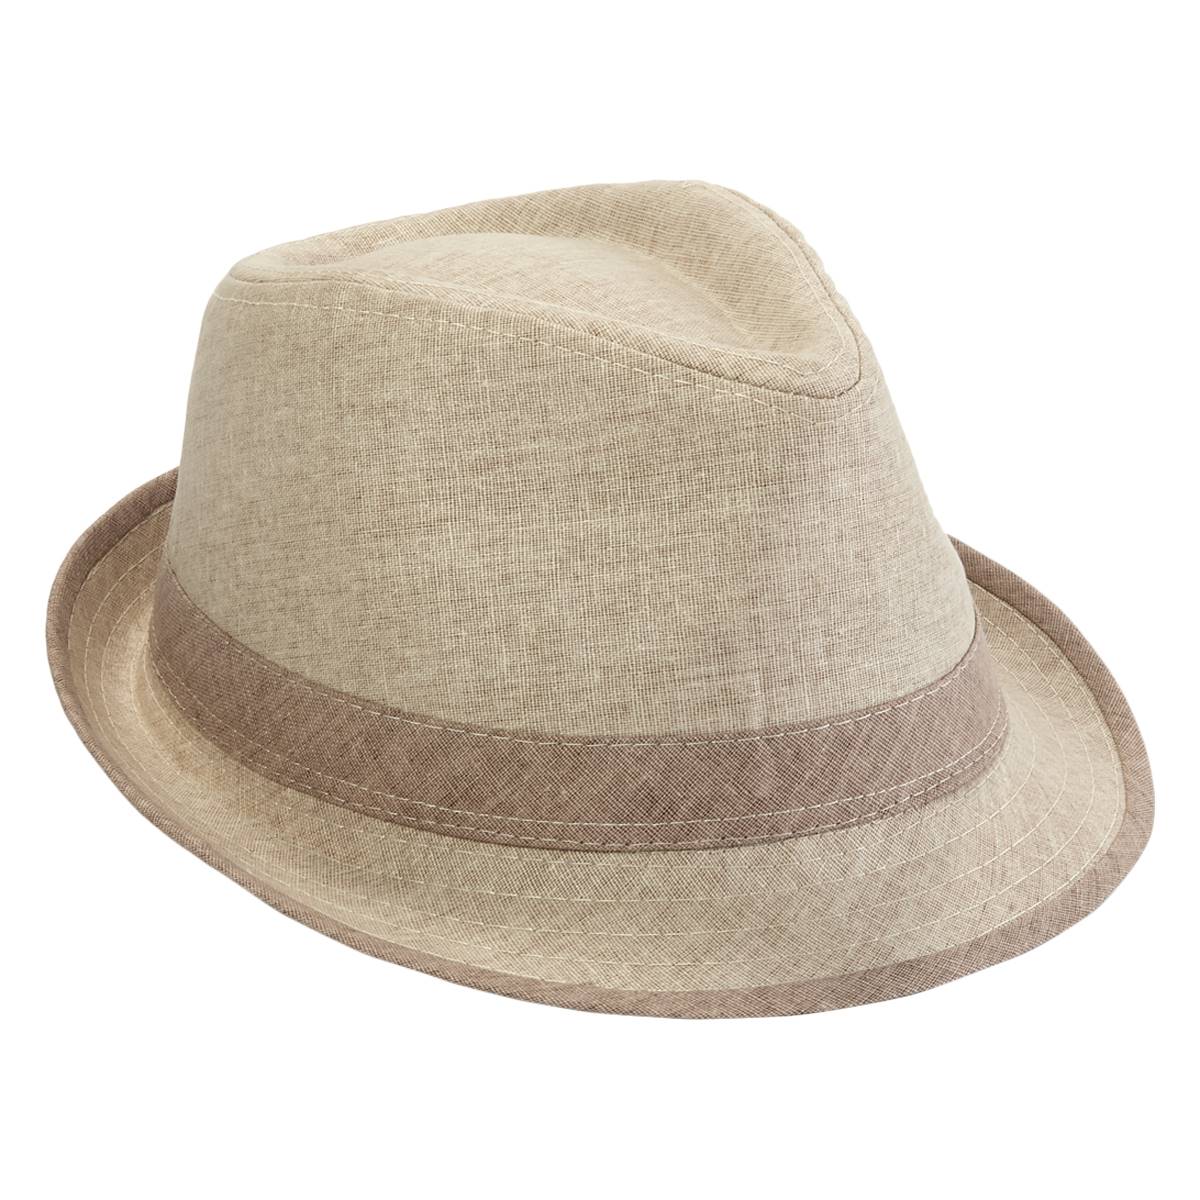 Mens Stetson Fedora Hat With Contrast Trim